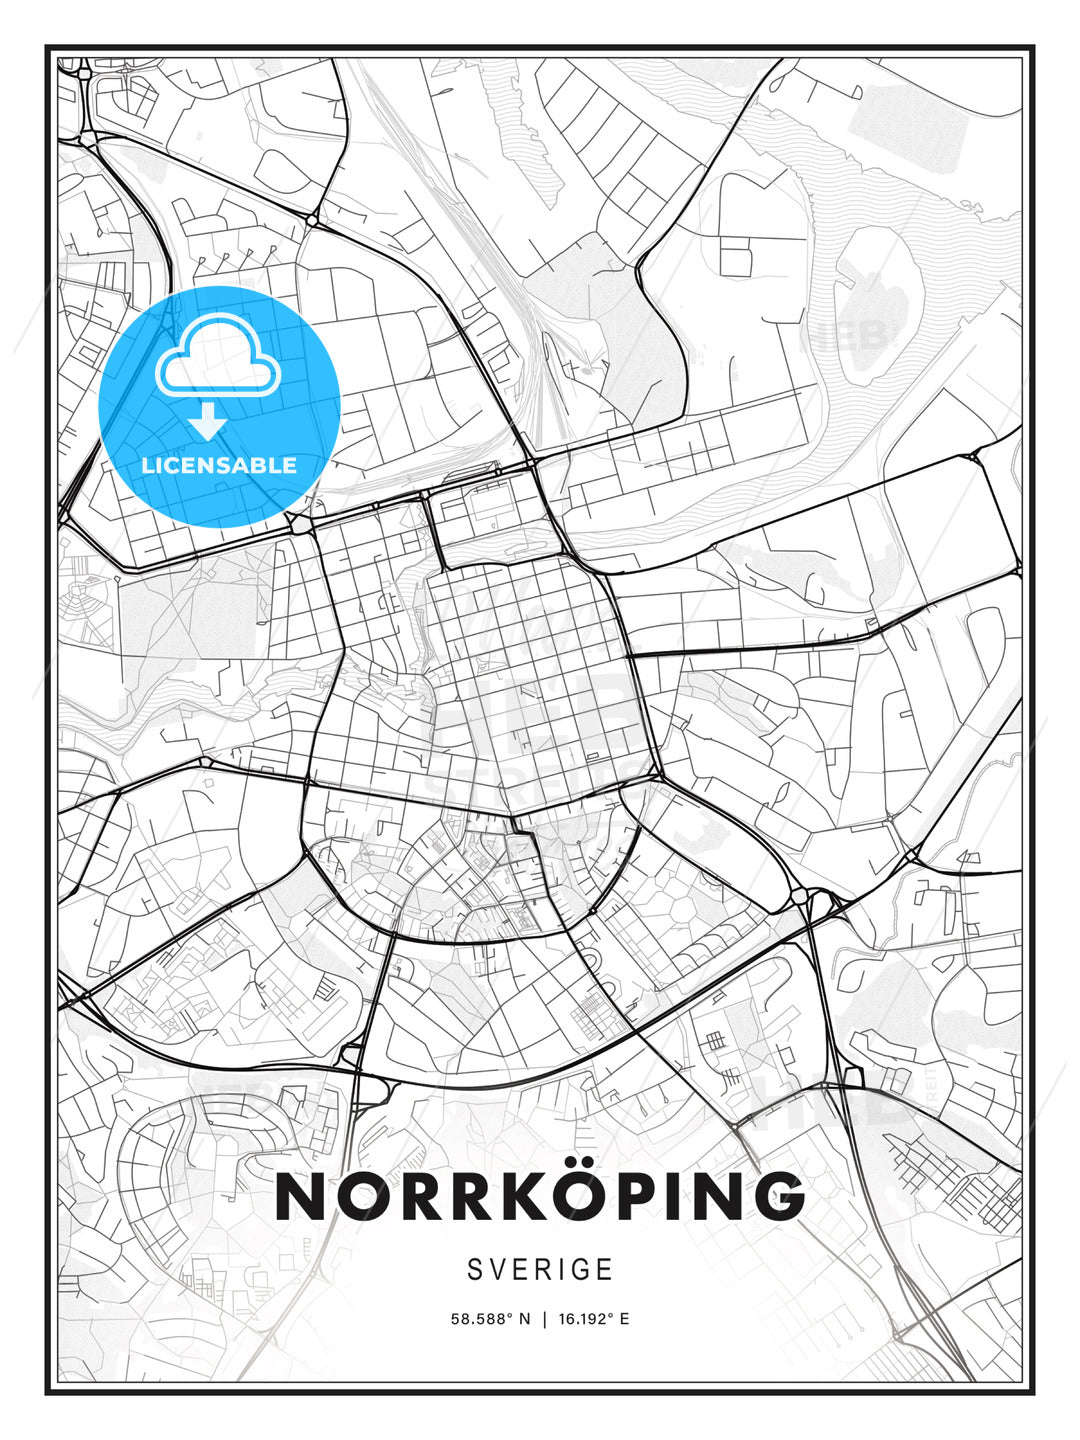 Norrköping, Sweden, Modern Print Template in Various Formats - HEBSTREITS Sketches